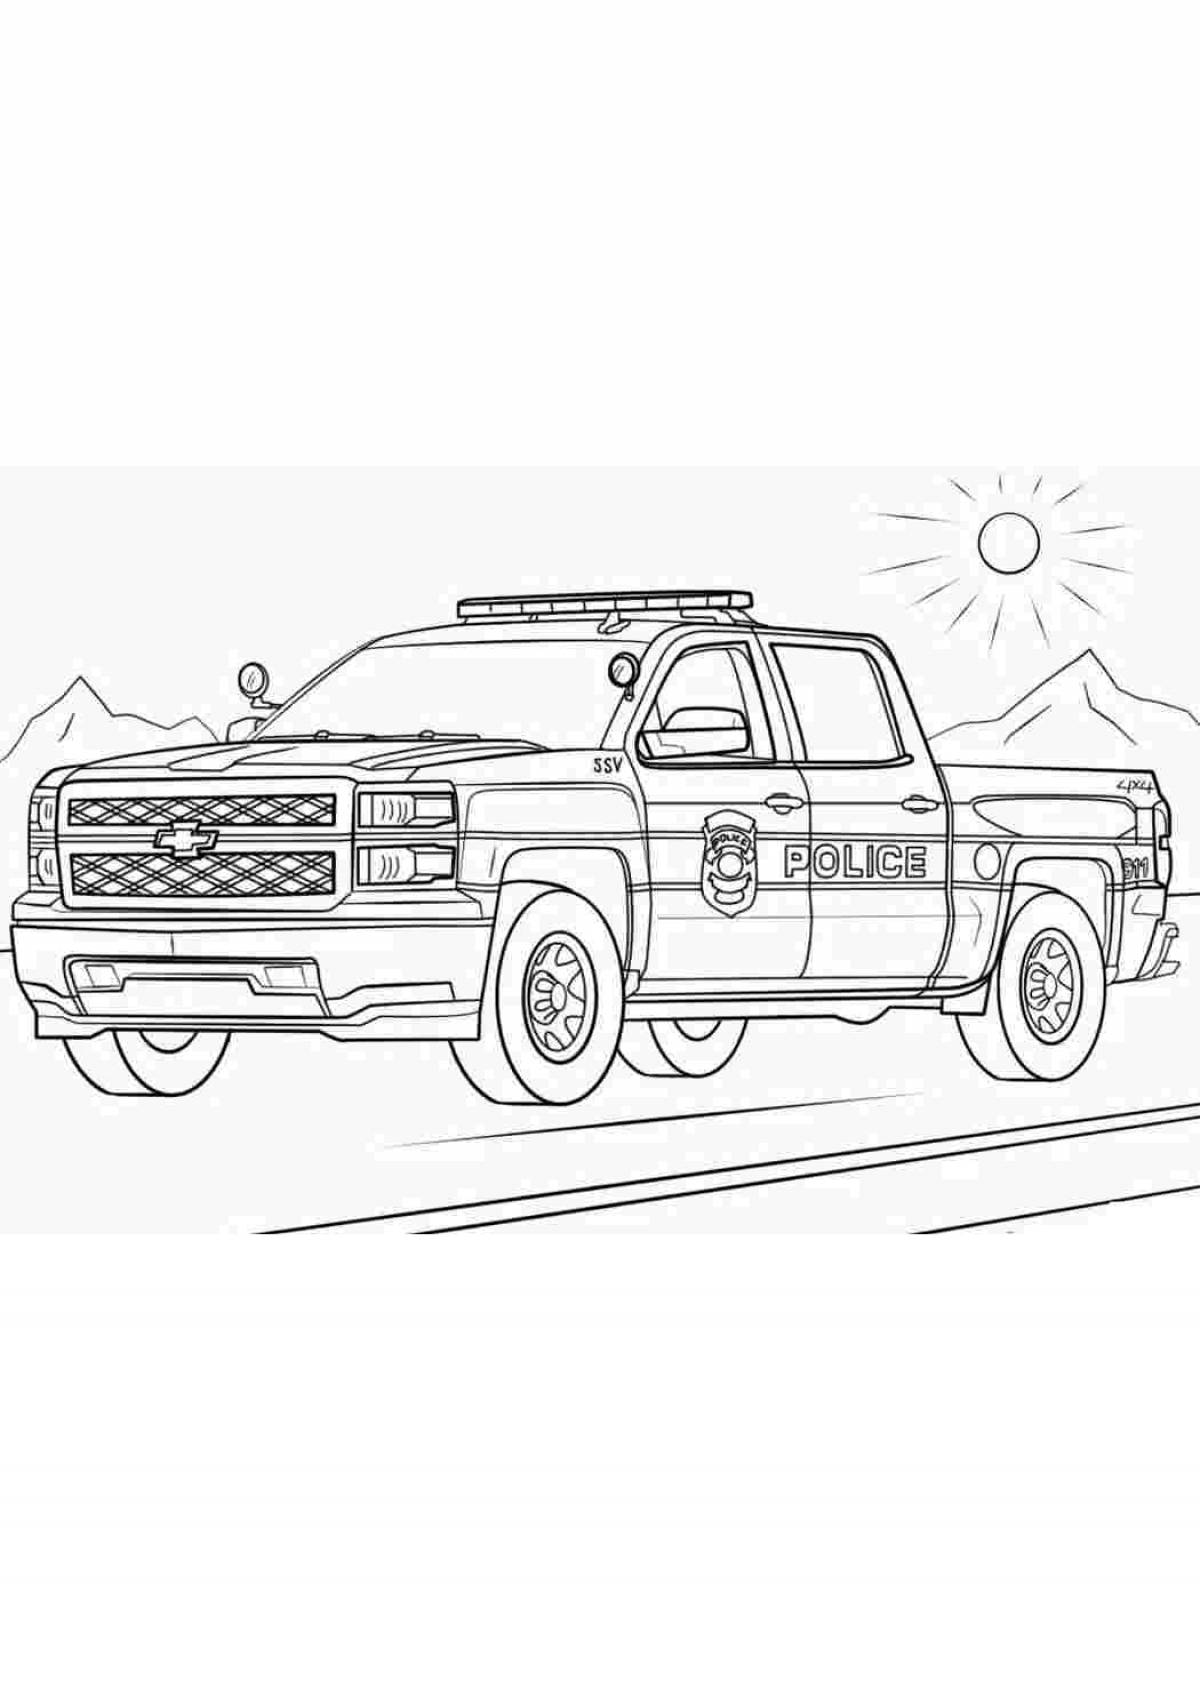 Комплекс mercedes police coloring page